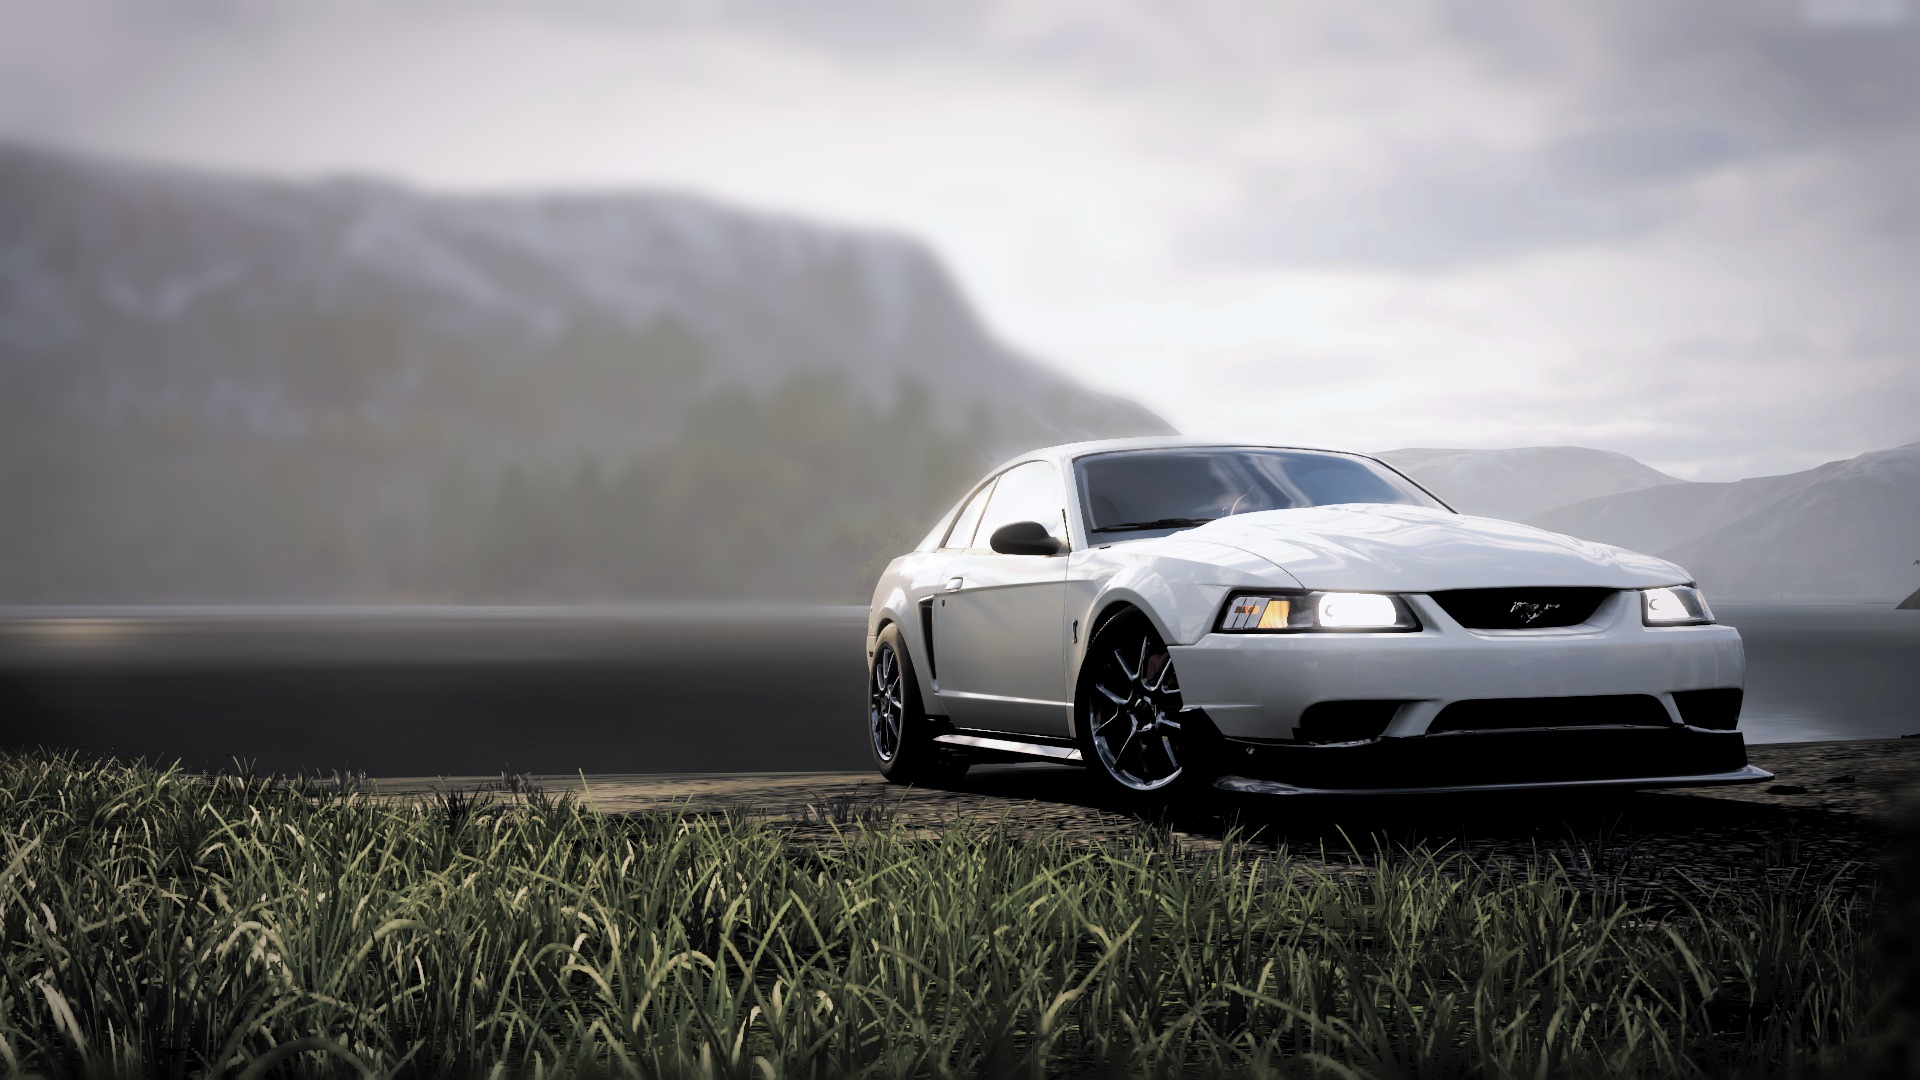 New Edge Mustang Gt Wallpapers